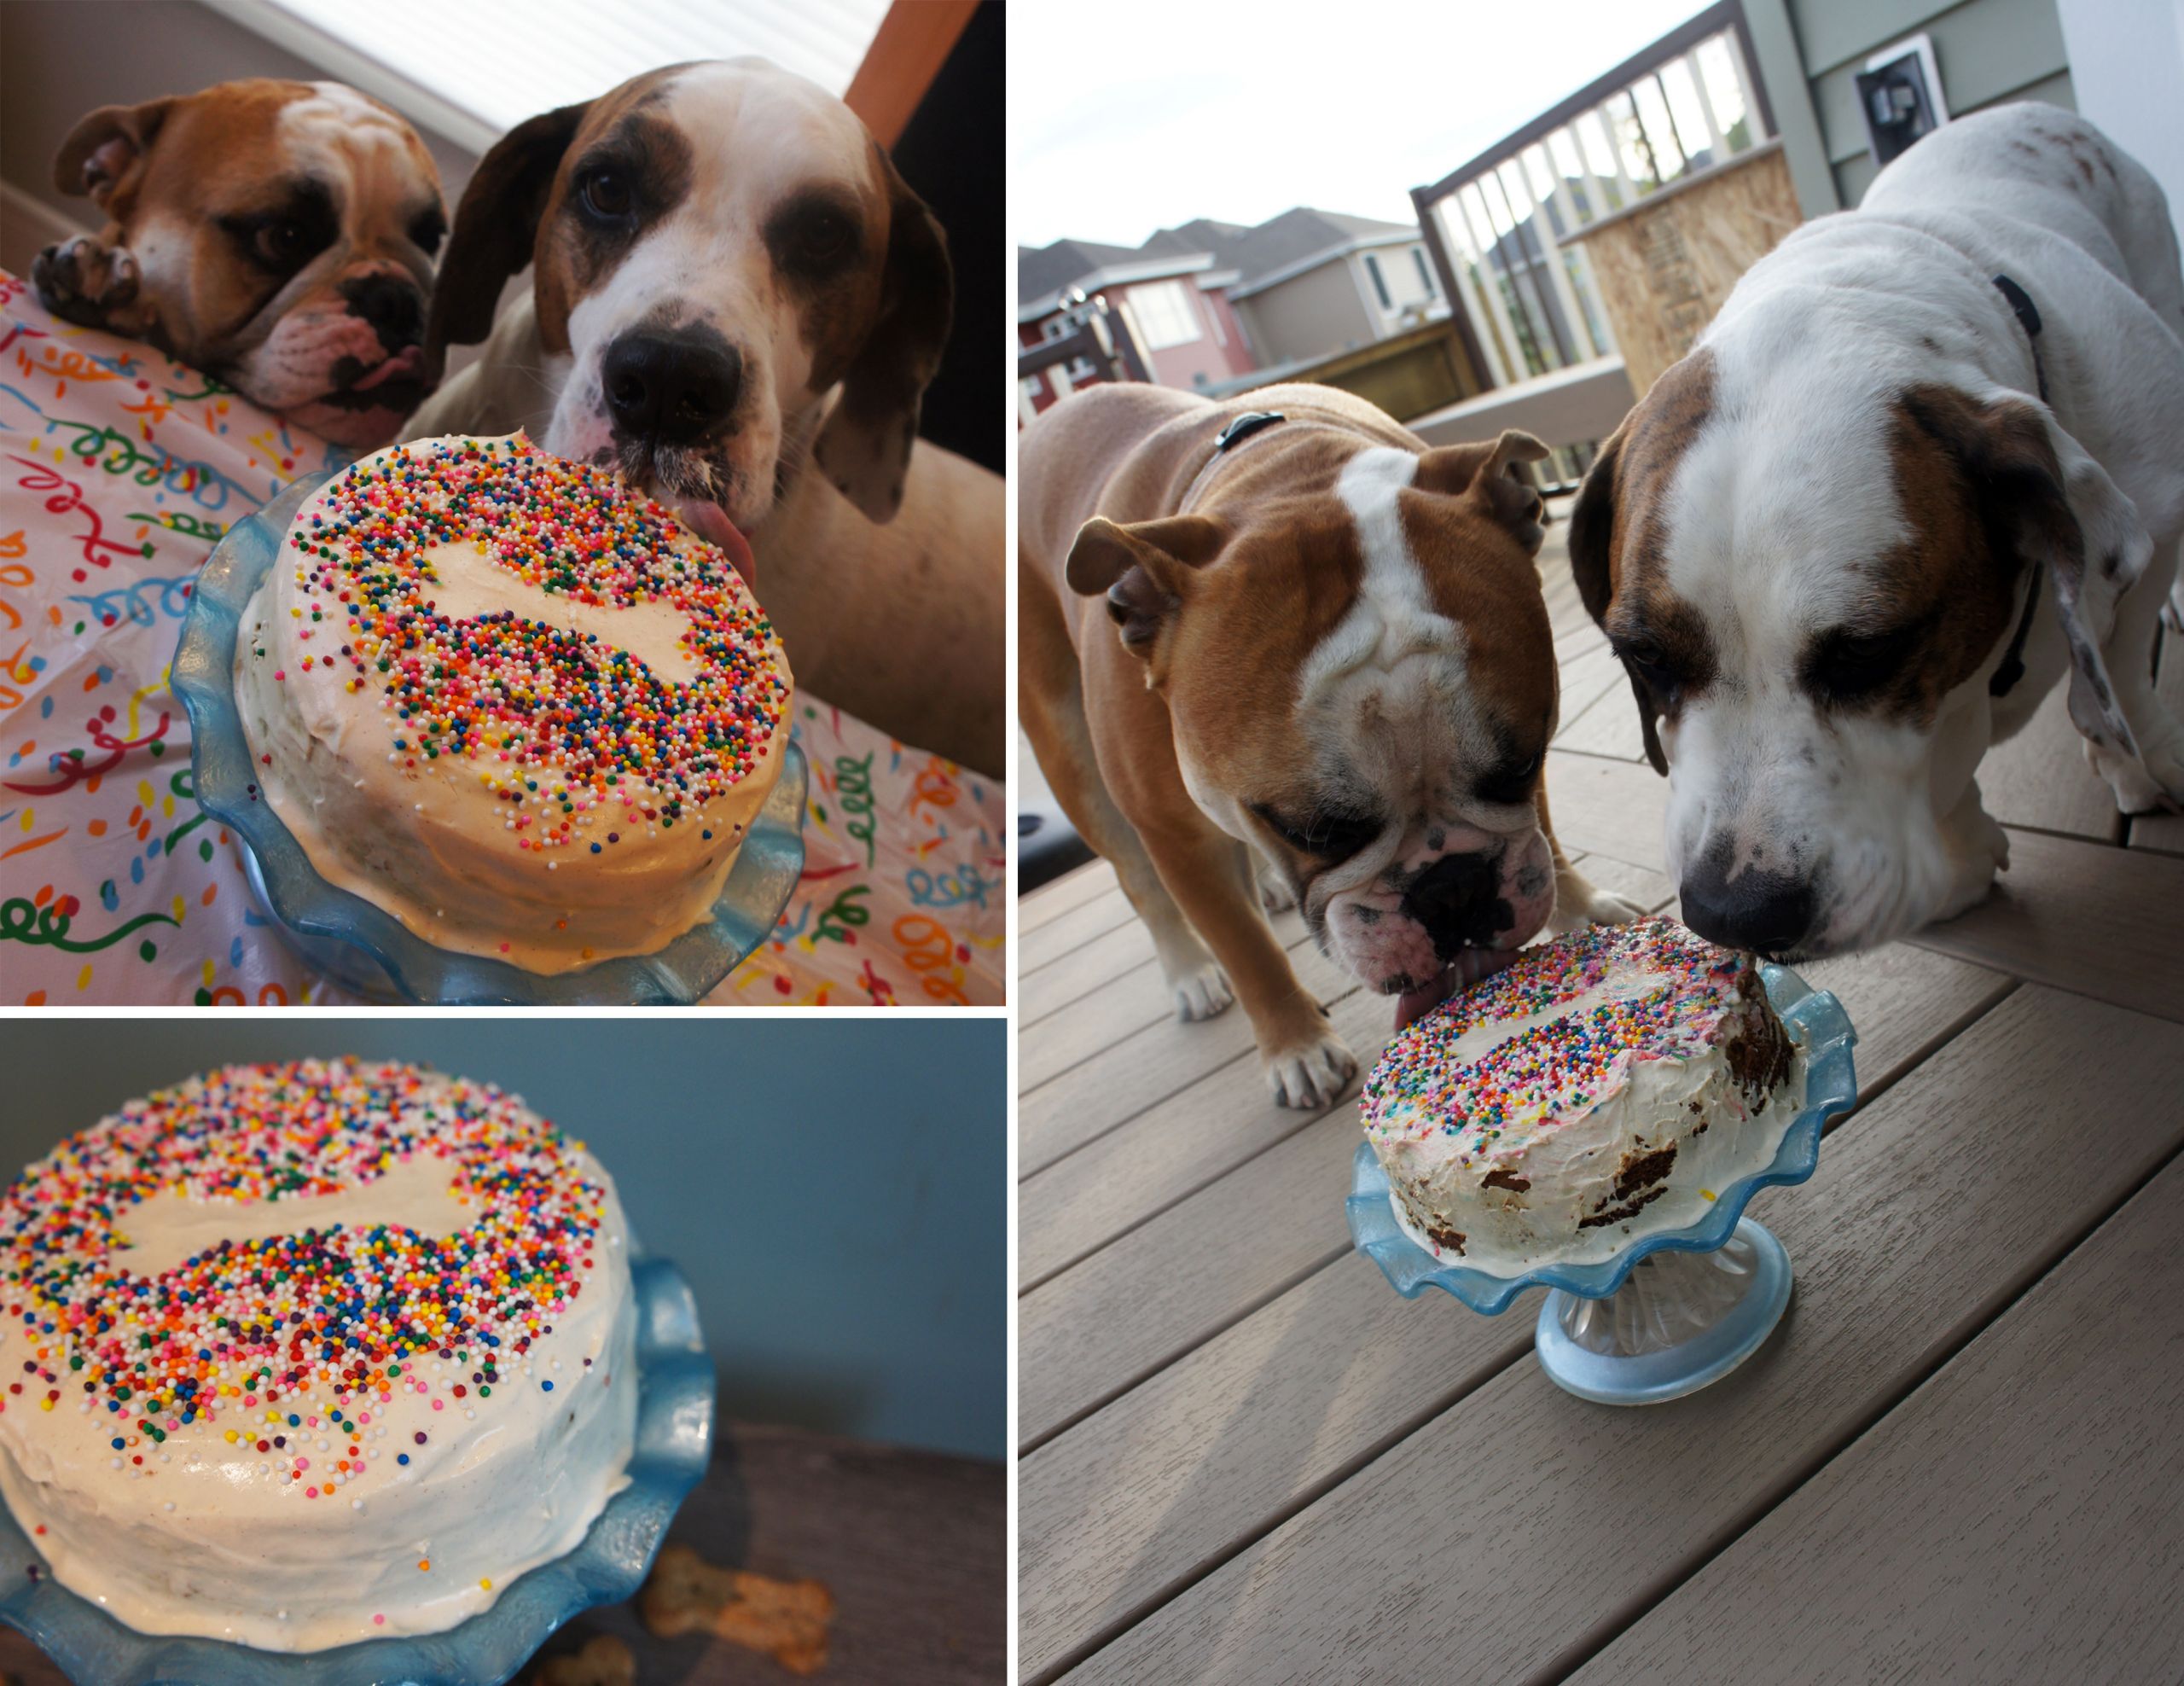 Dog Birthday Cake Recipe Without Peanut Butter
 Peanut Butter Delight Doggie Birthday Cake